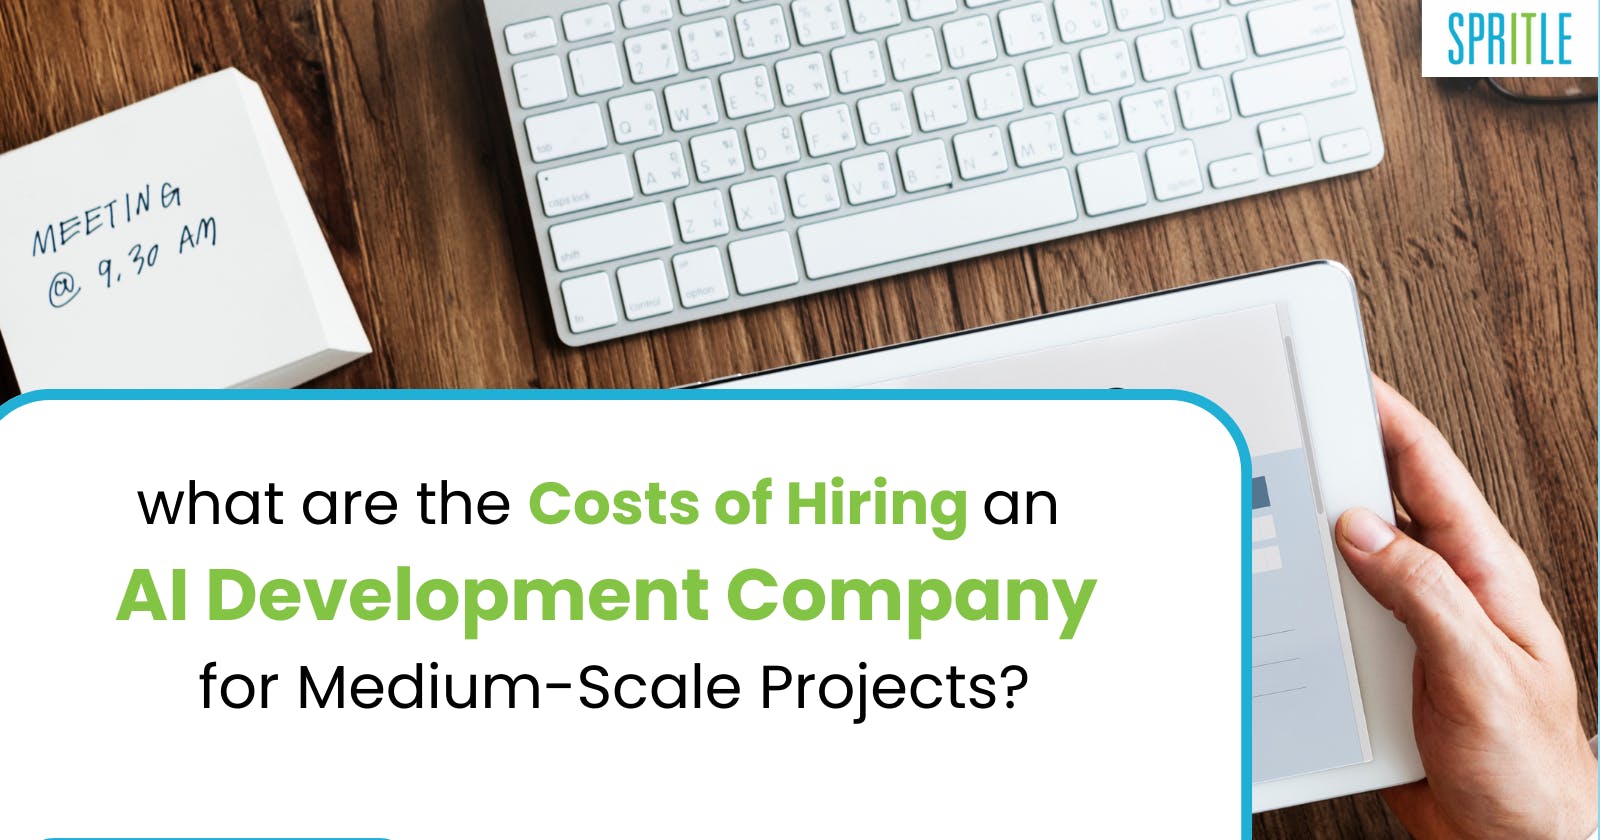 Costs of Hiring an AI Development Company for Medium-Scale Projects